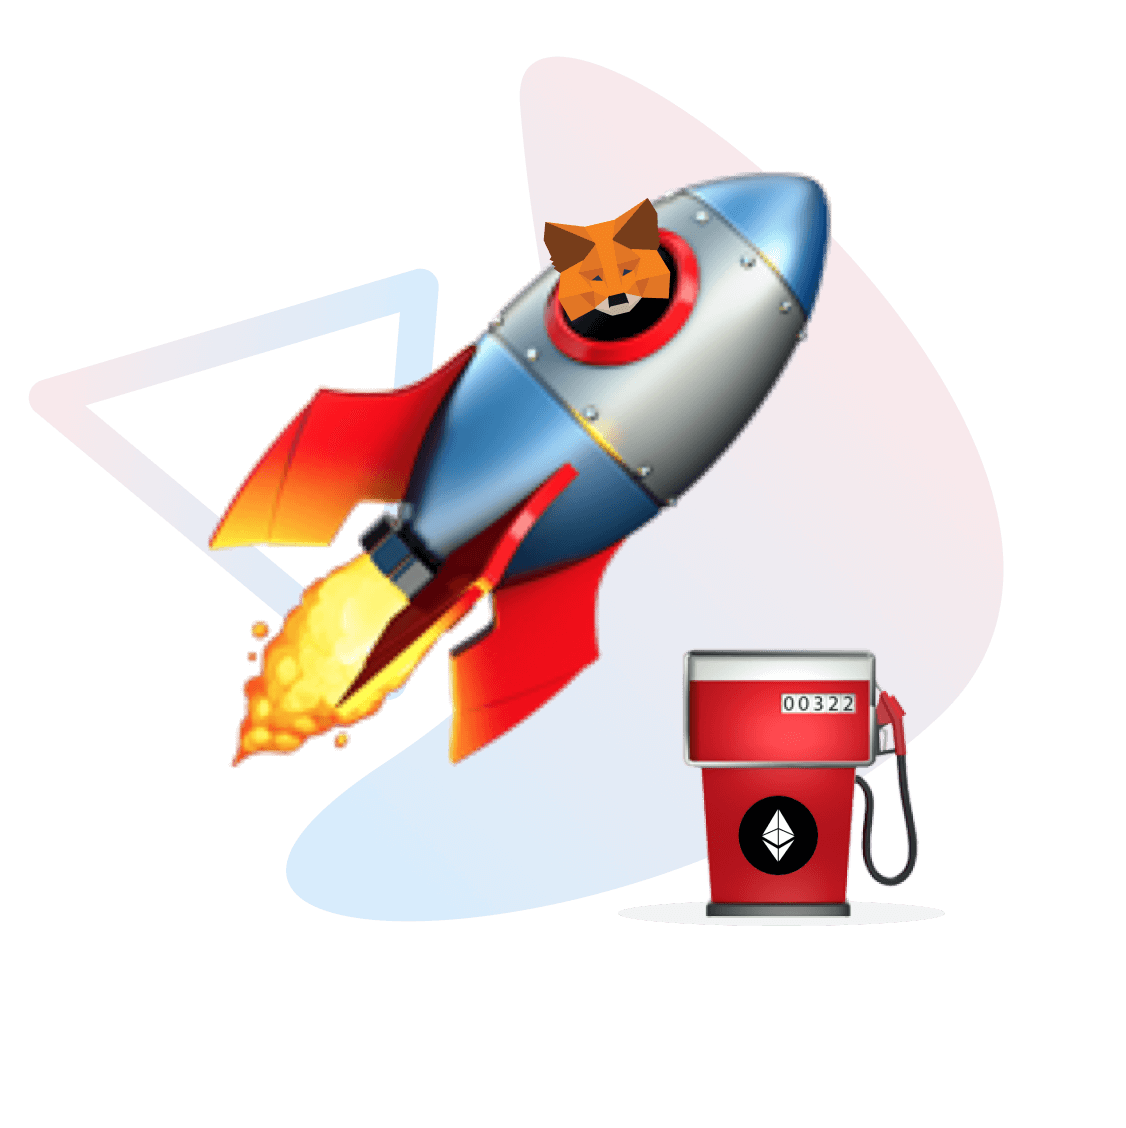 MetaMask fox in a rocket with a gas tank